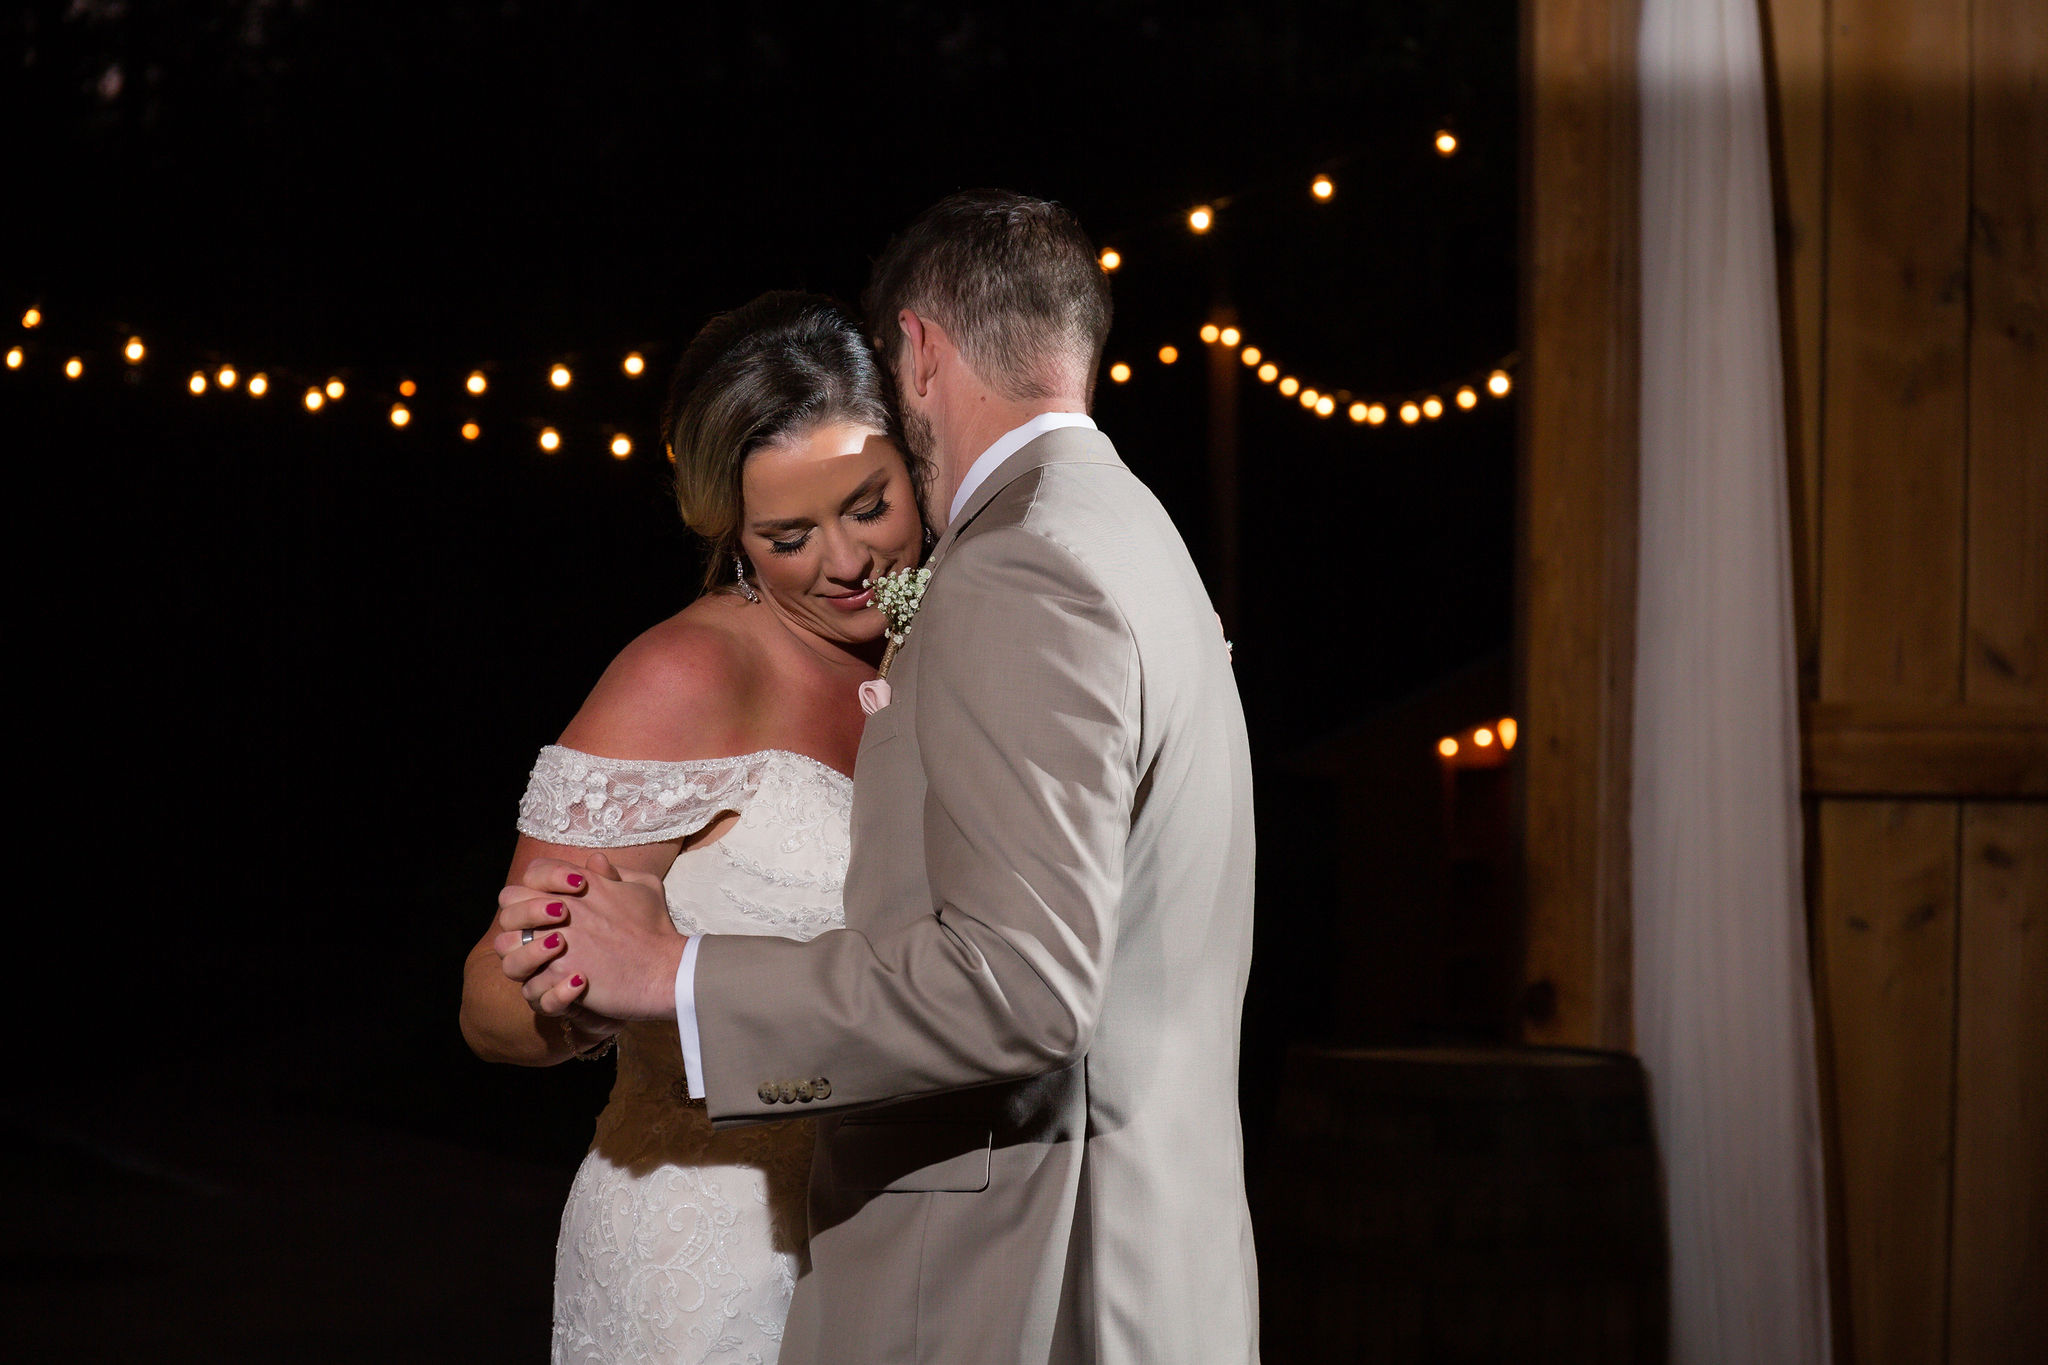 A sweet moment captured during their first dance. 